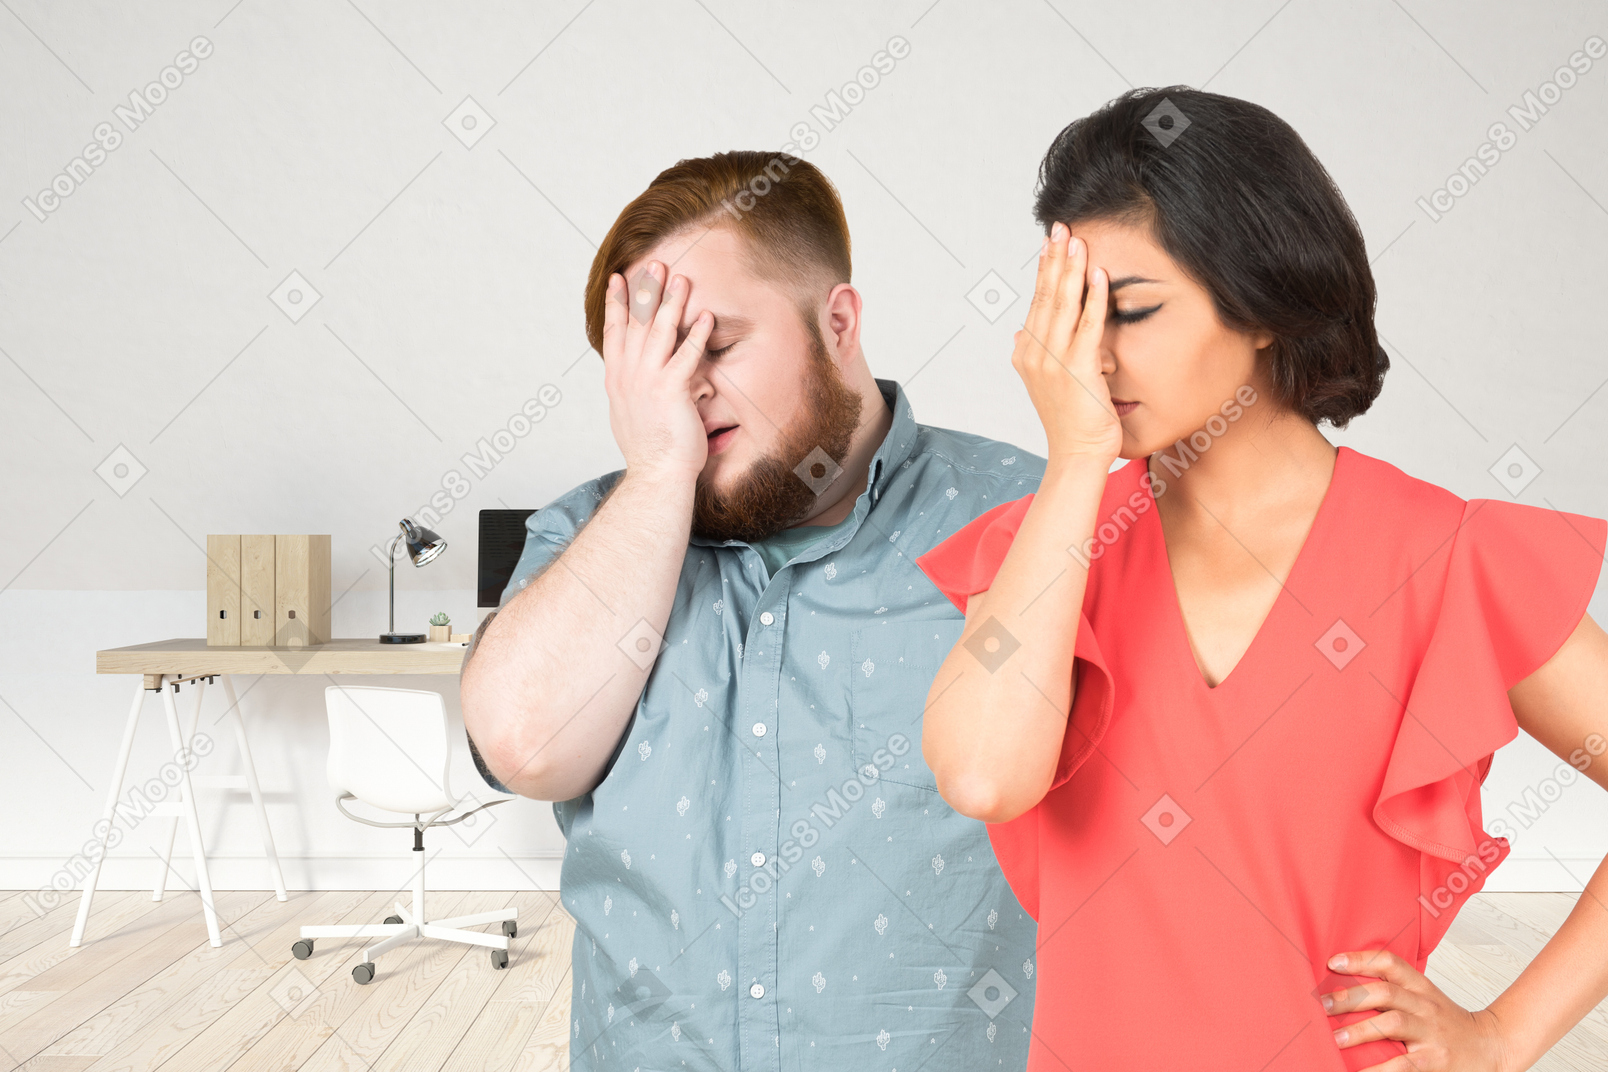 A man and a woman facepalming